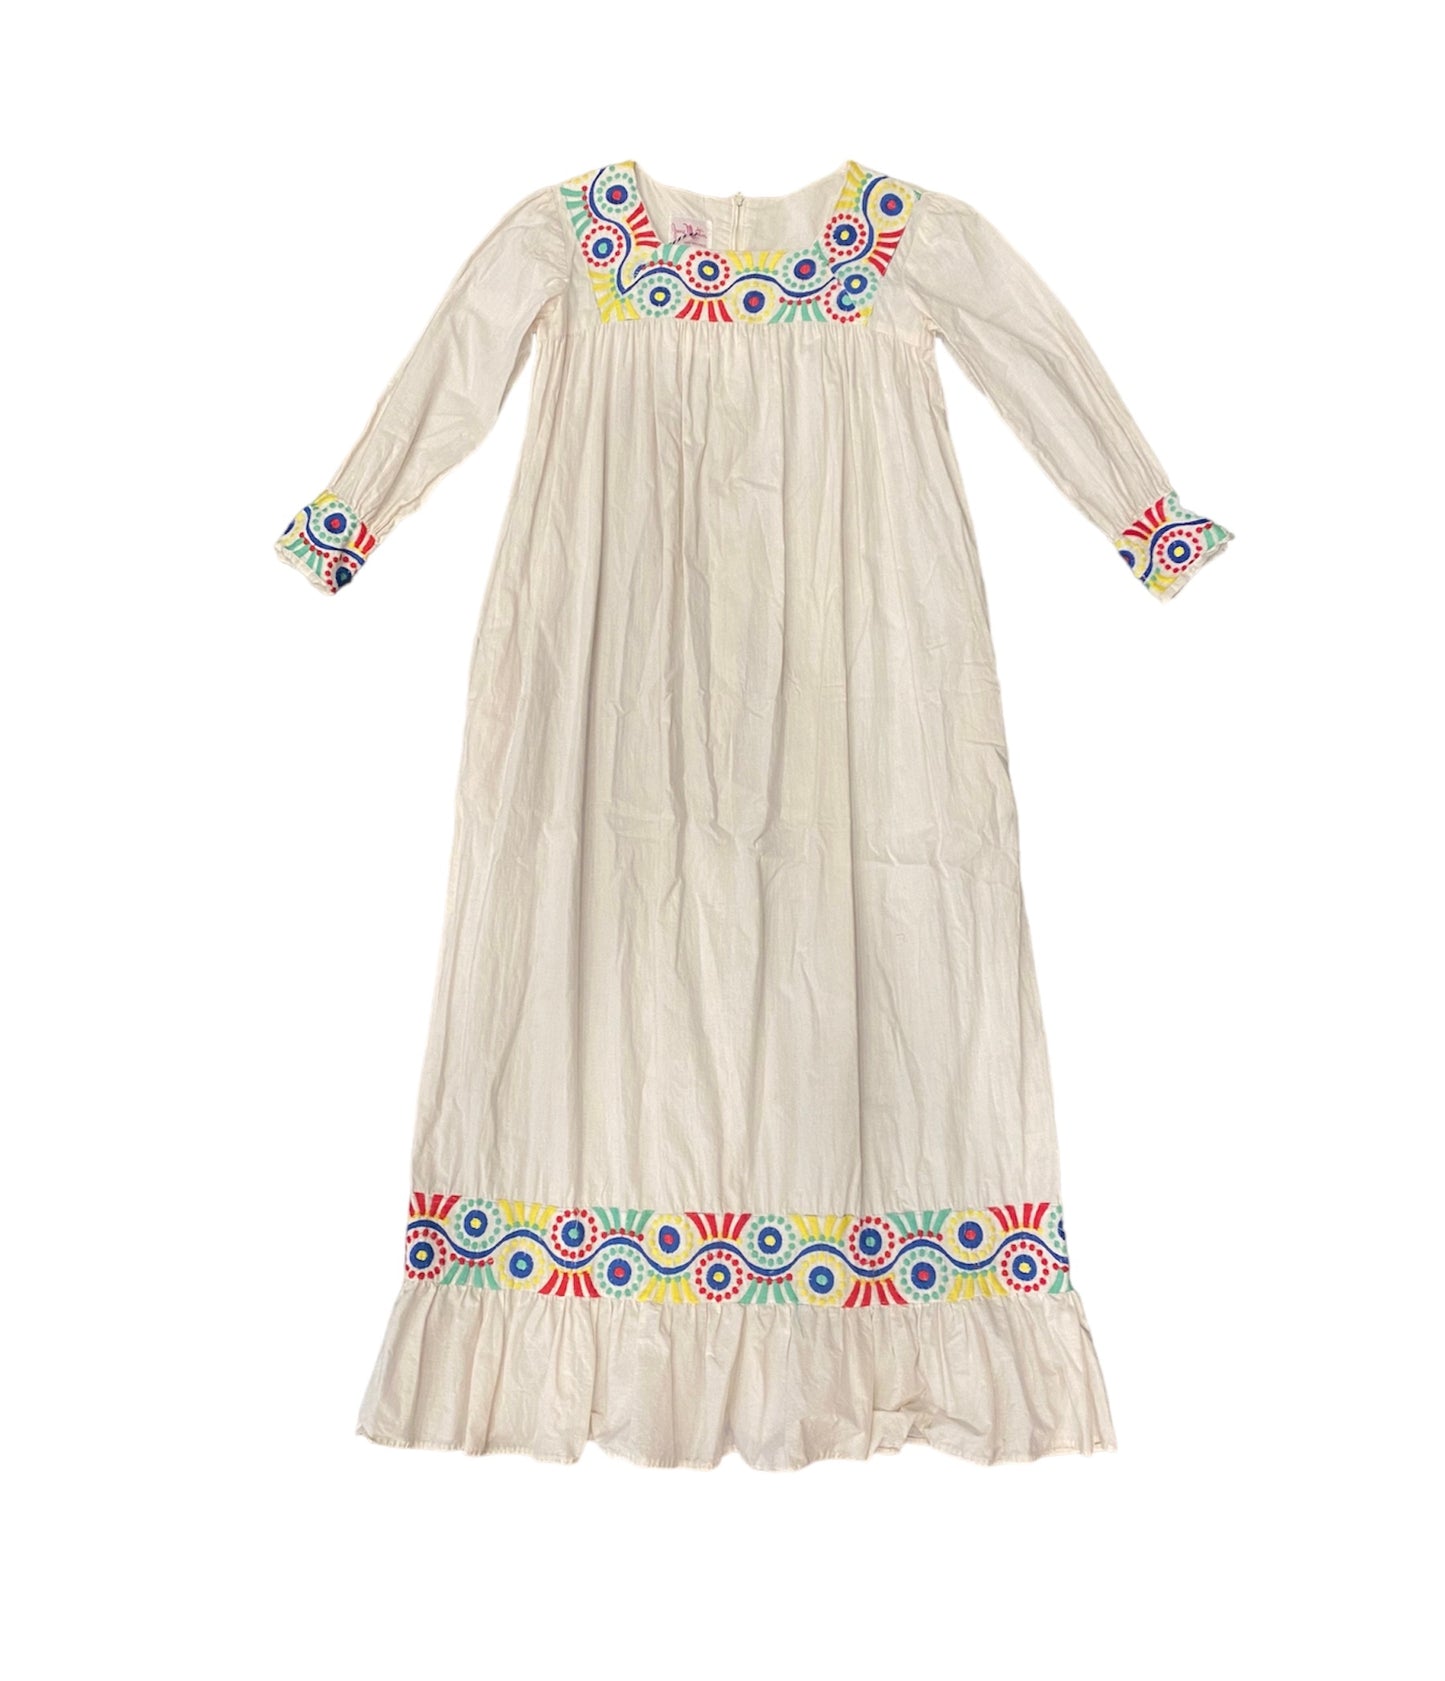 1970’s Embroidered Cotton Peasant Dress by Jane Martin